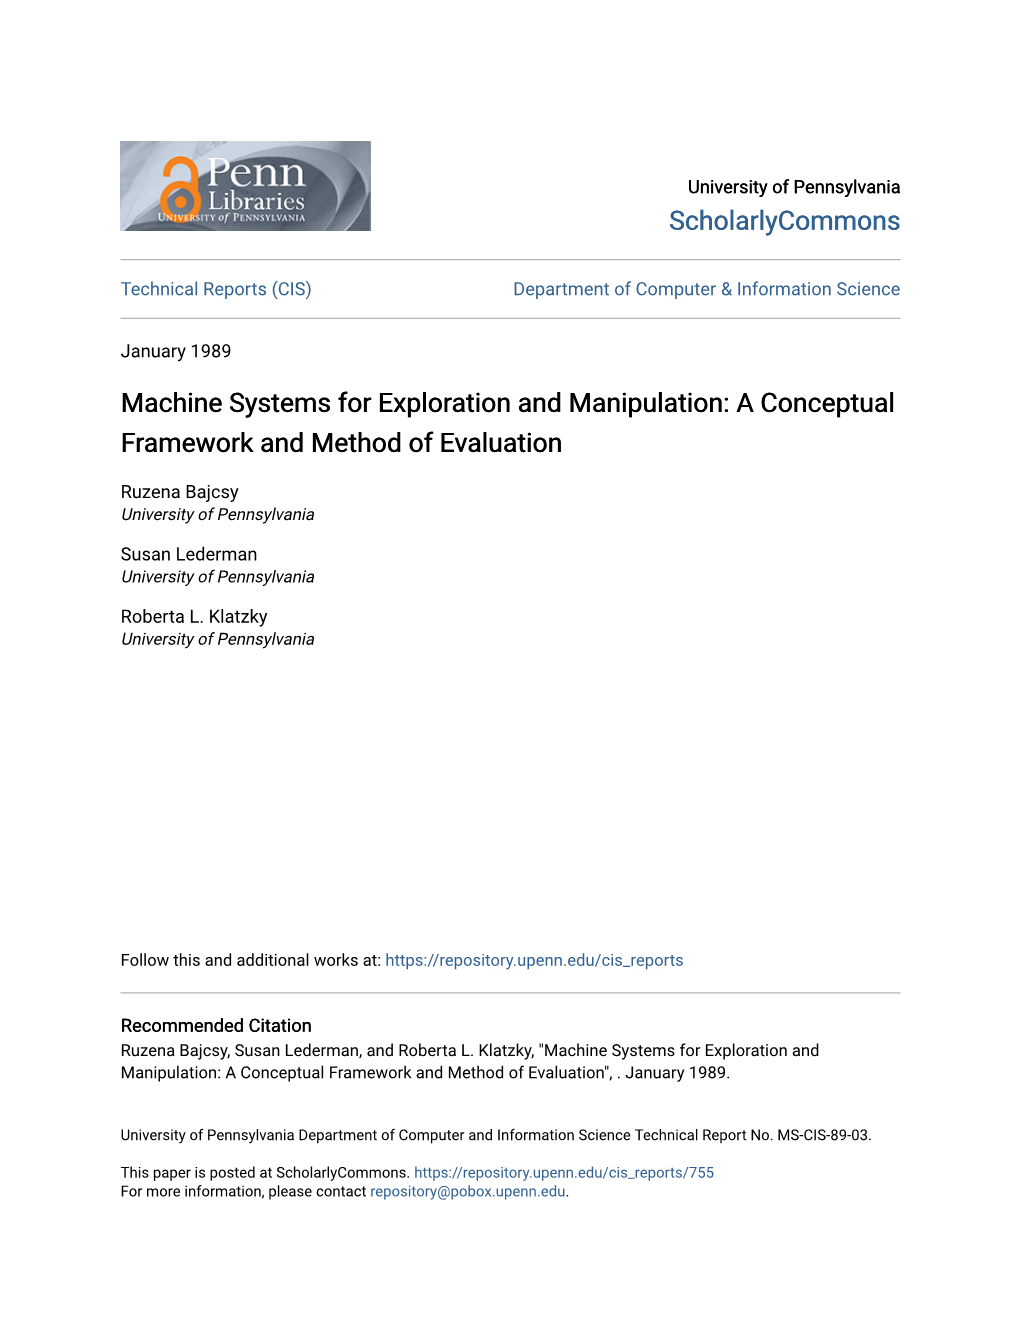 Machine Systems for Exploration and Manipulation: a Conceptual Framework and Method of Evaluation